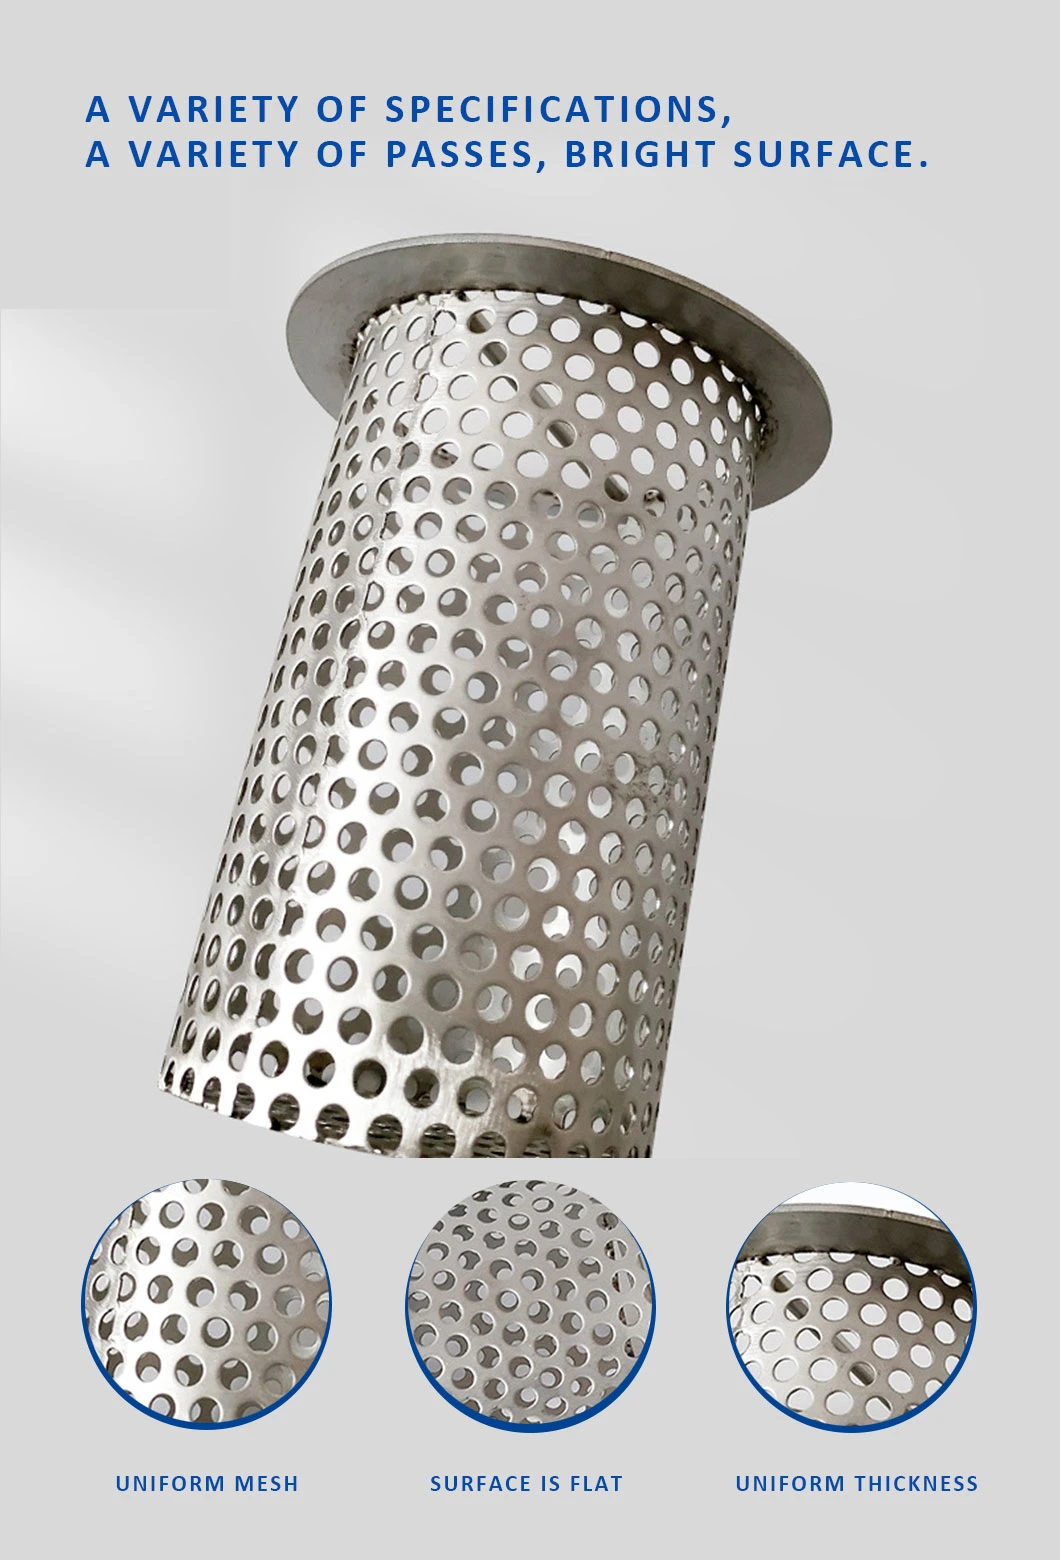 Stainless Steel Car Exhaust Pipe Mesh Perforated Tube Pipe